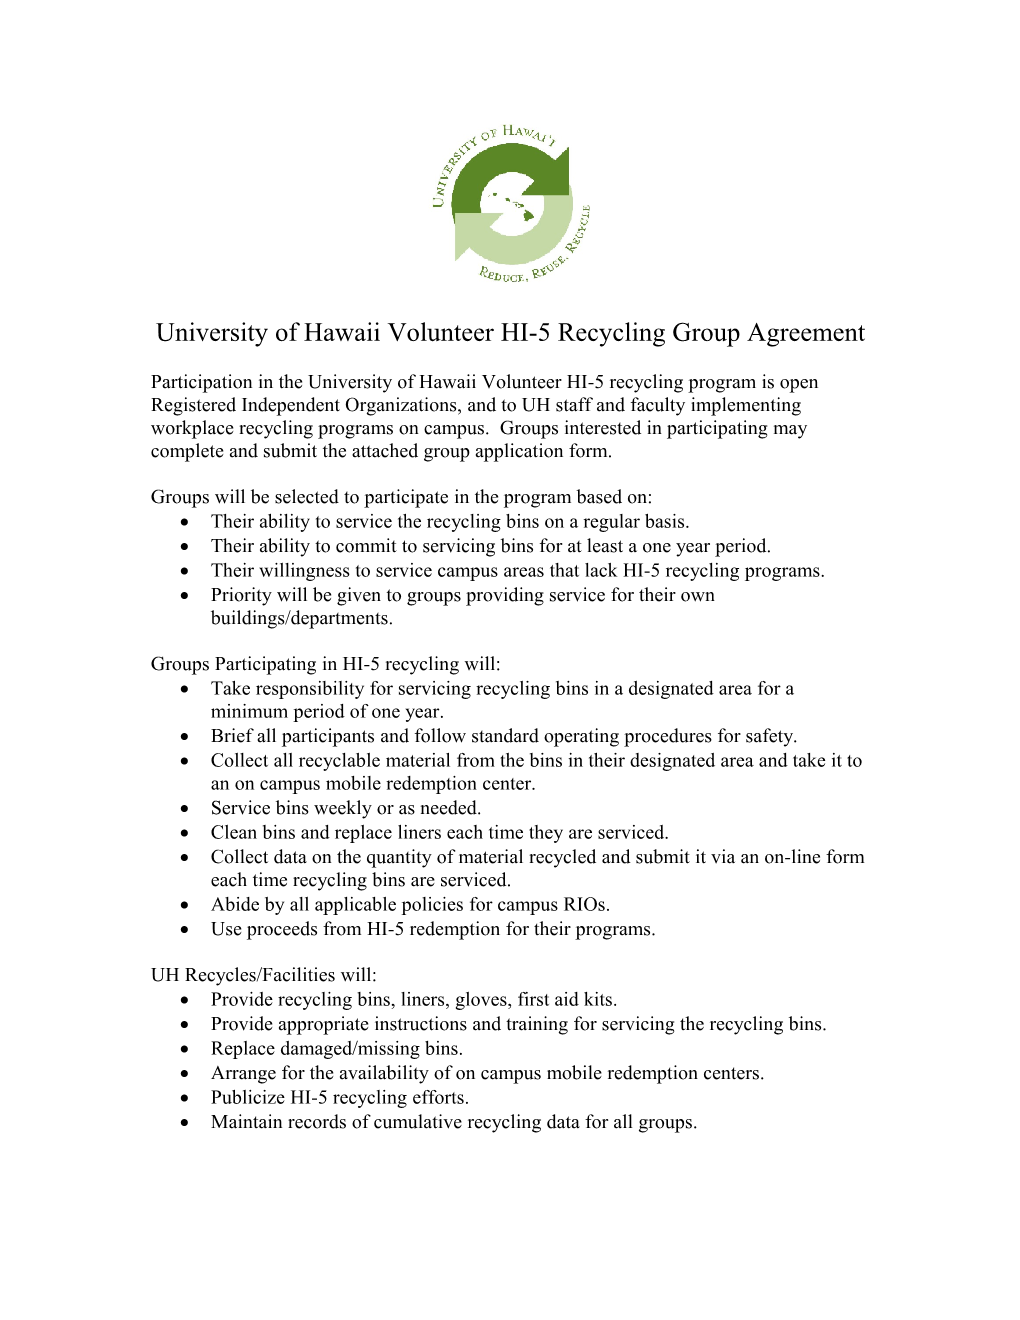 UH Recycles HI-5 Recycling Group Agreement